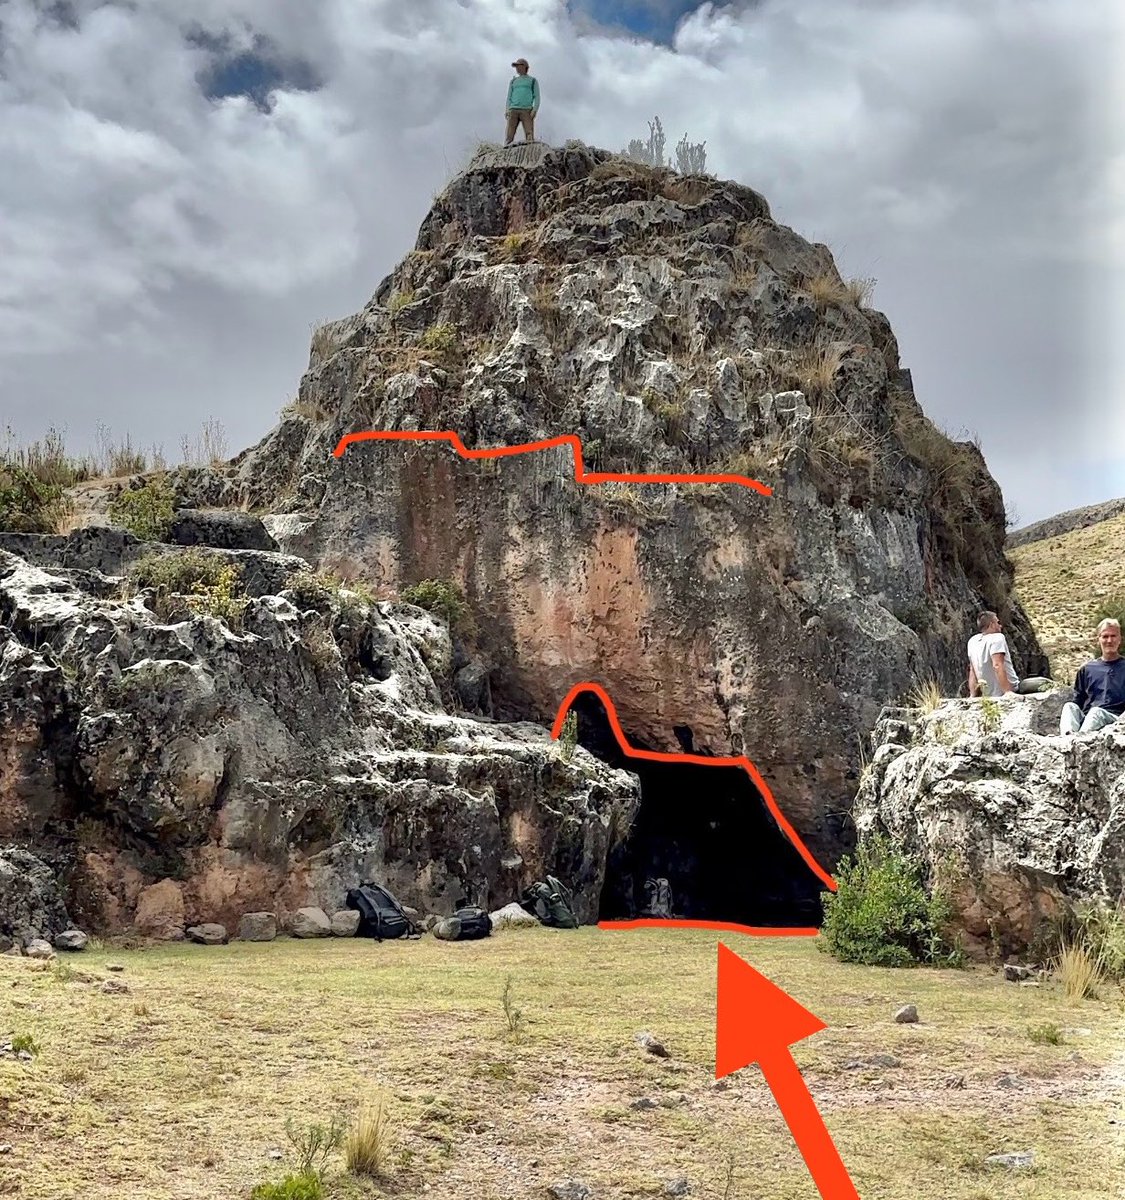 This is one of the seemingly endless sacred “Huacas,” as called by the Inca, that litter the Cusco landscape. This one is essentially a rock outcropping with a natural cave that has been precision shaped both outside & inside.